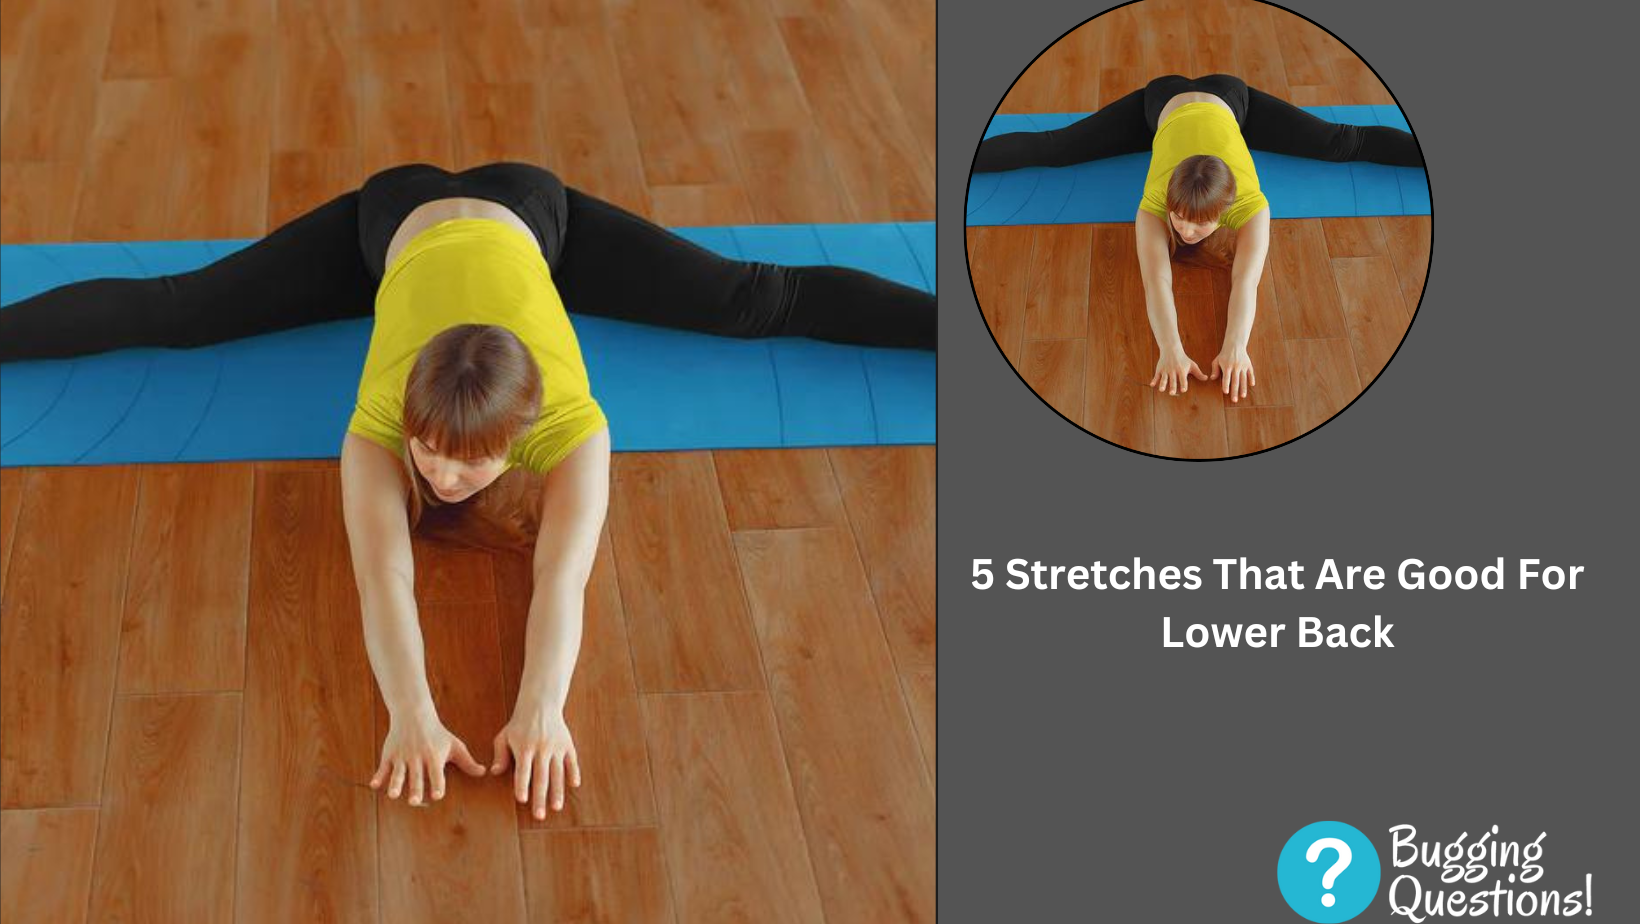 Stretches That Are Good For Lower Back